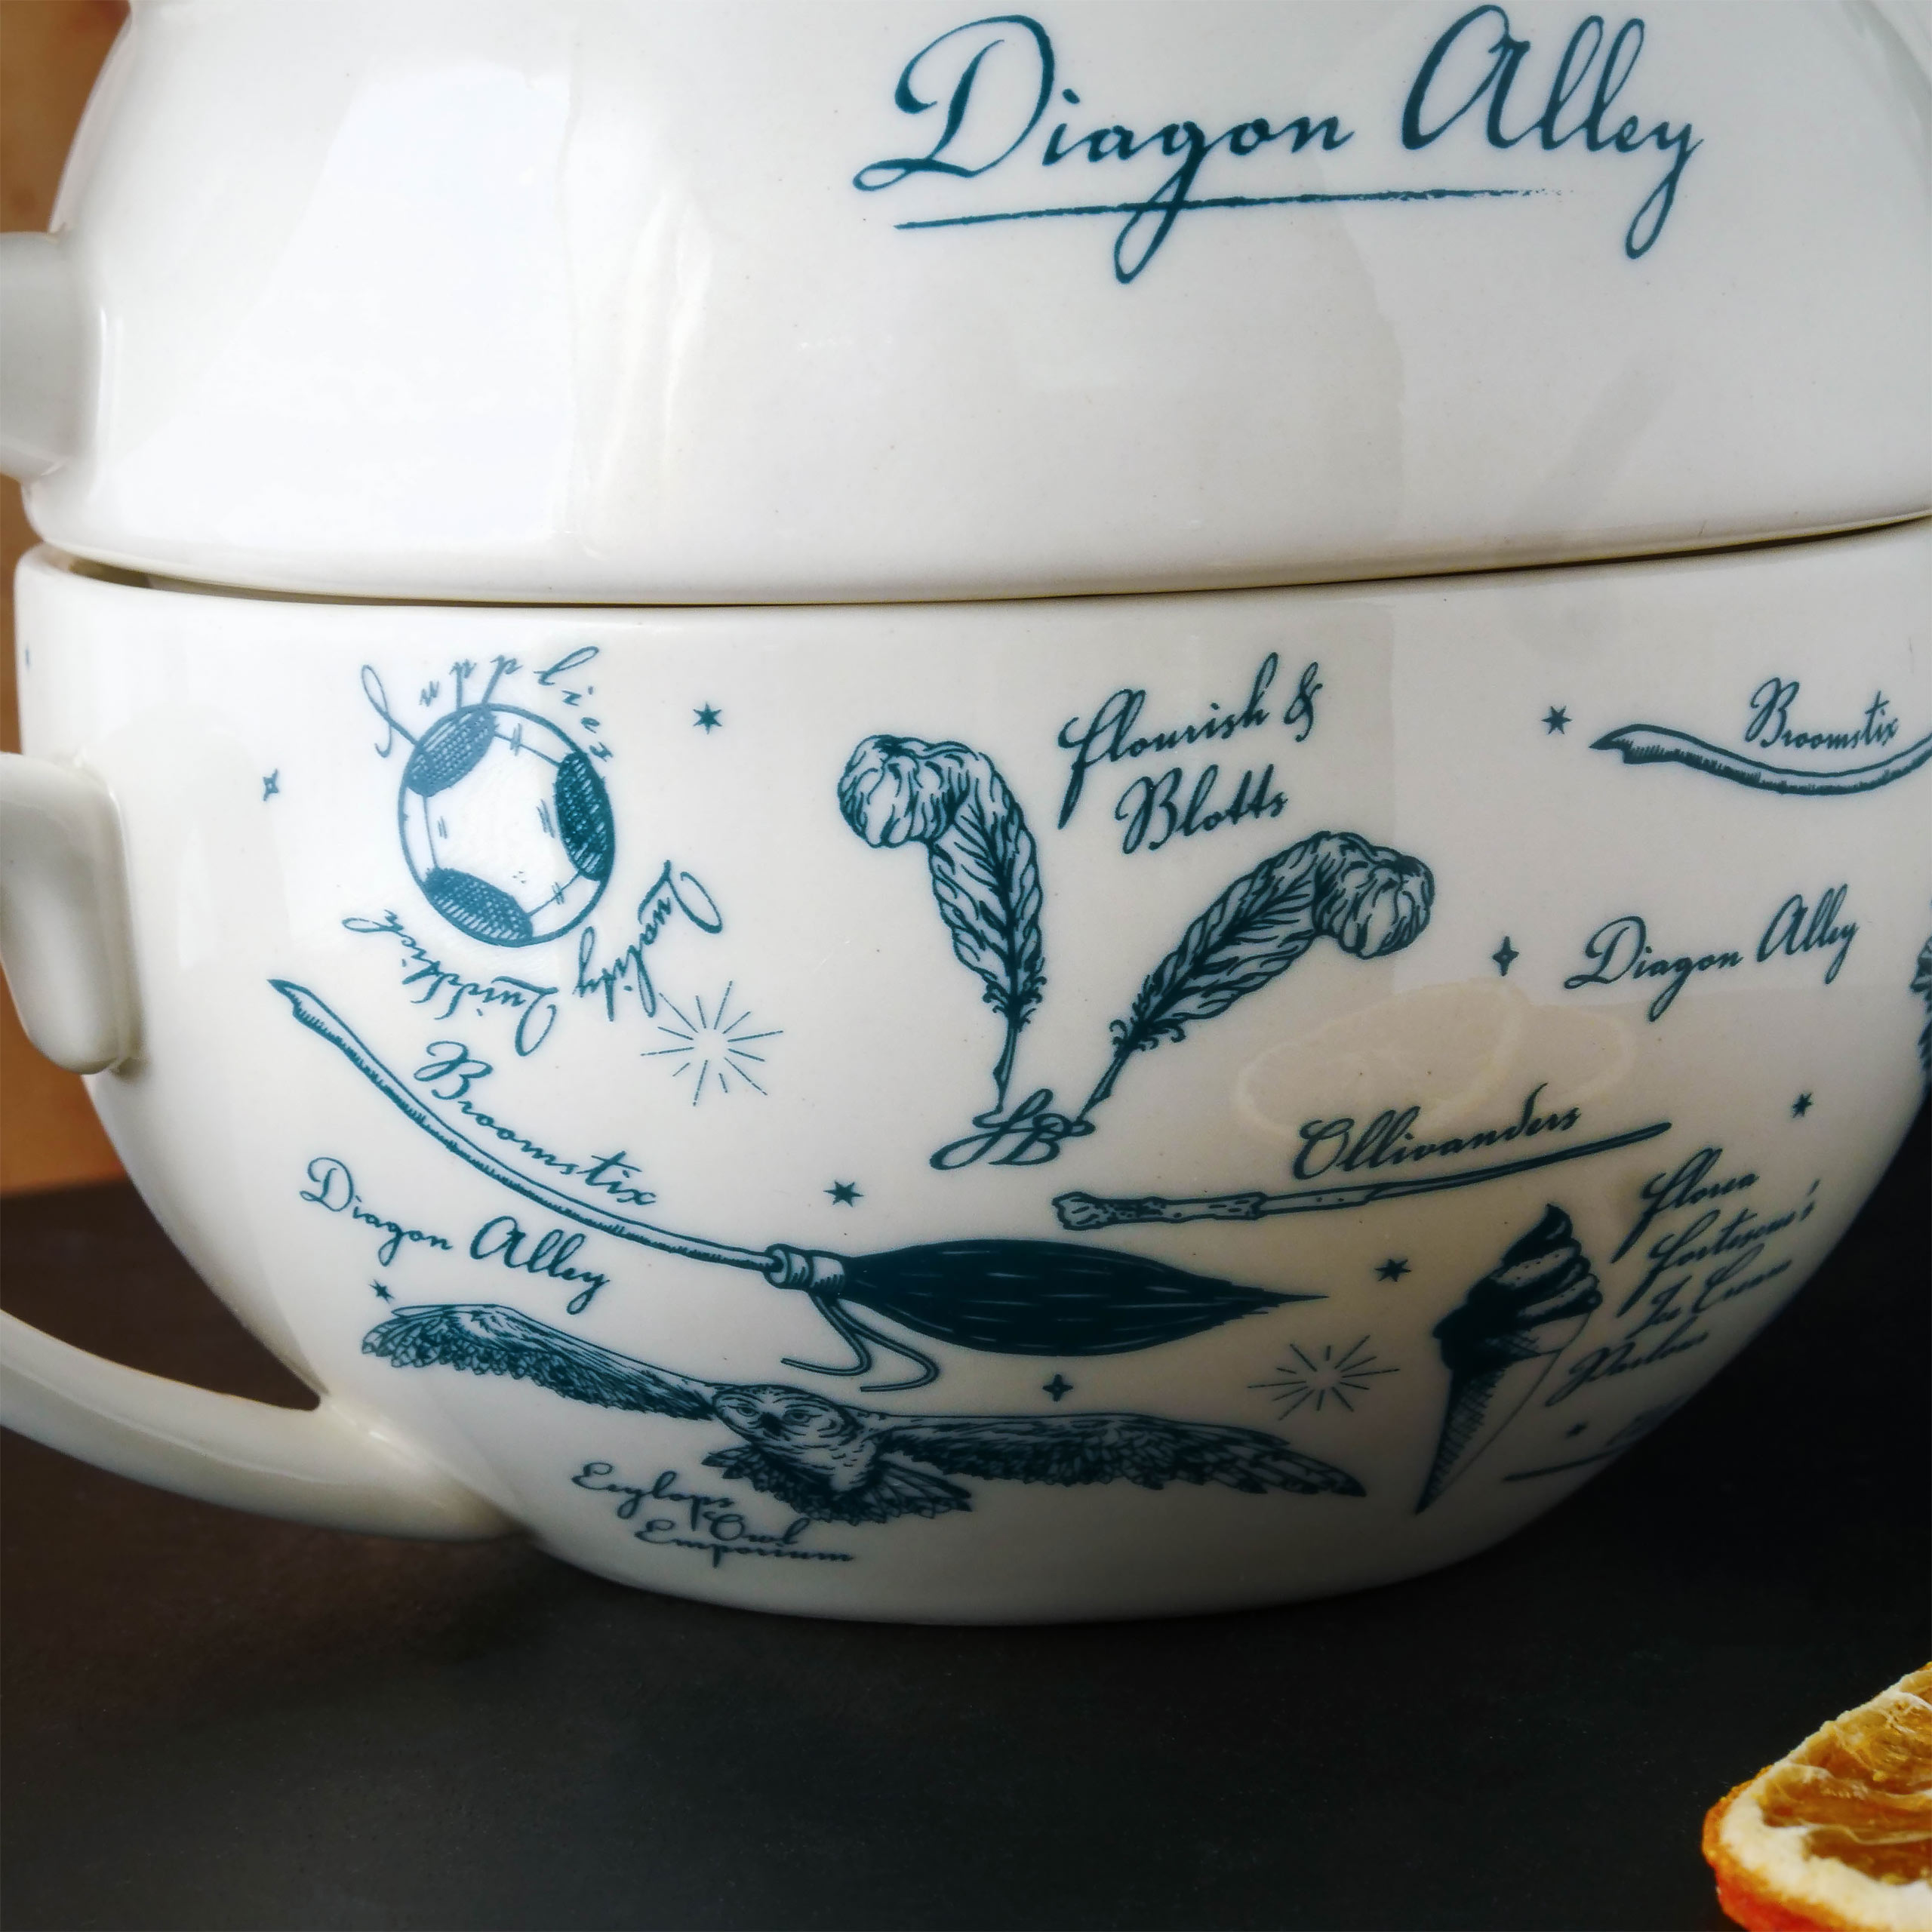 Harry Potter - Diagon Alley Tea Pot with Cup